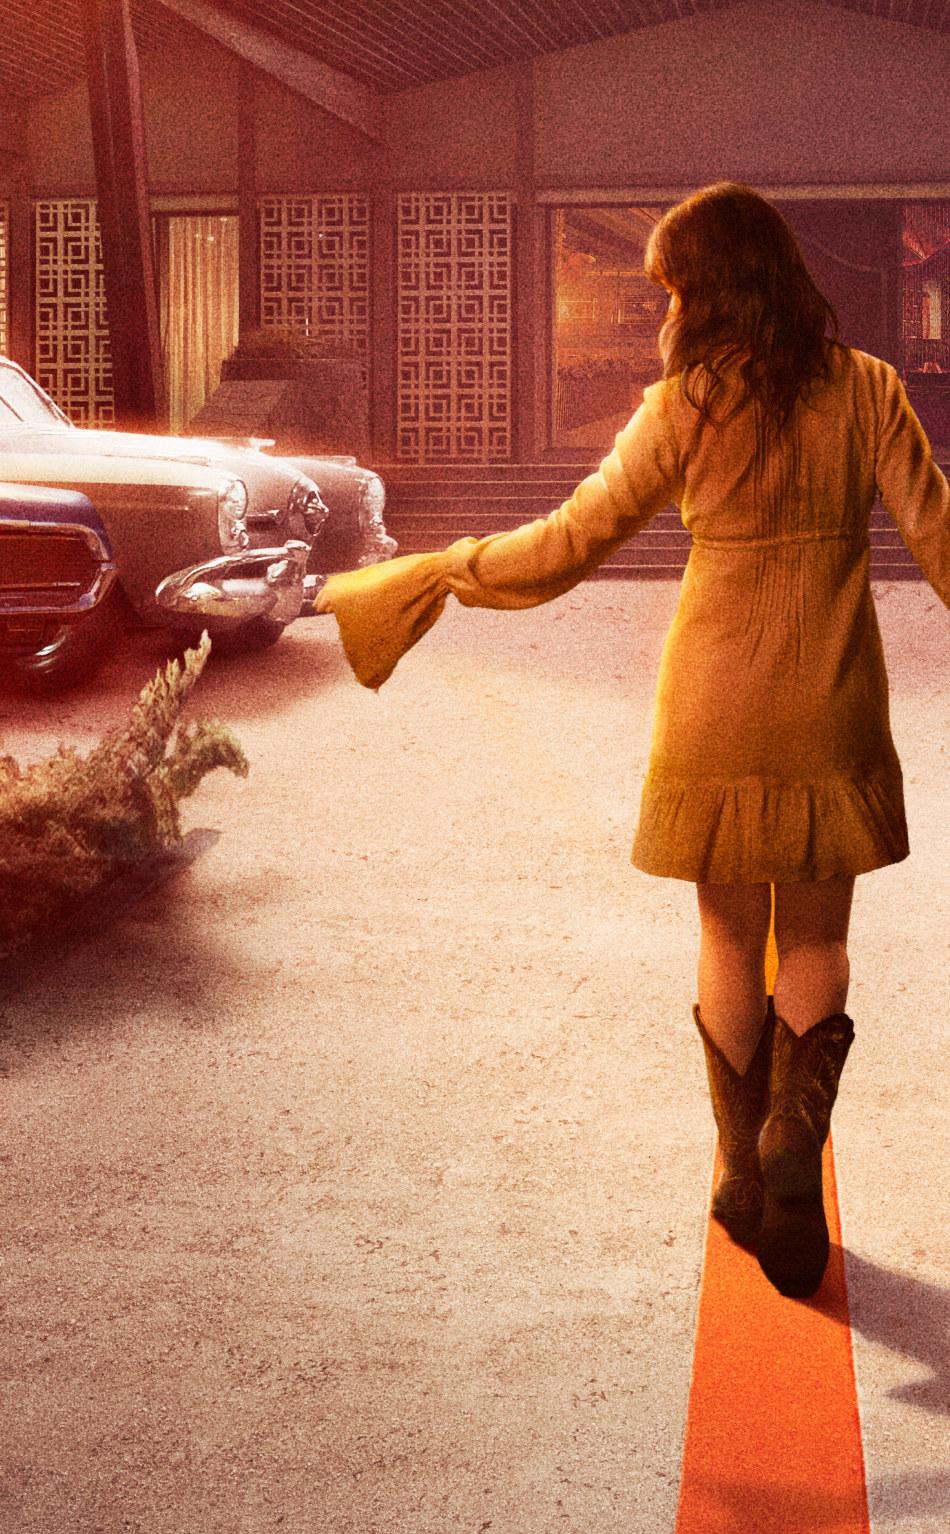 Cailee Spaeny Bad Times at the El Royale 2018 Movie Poster